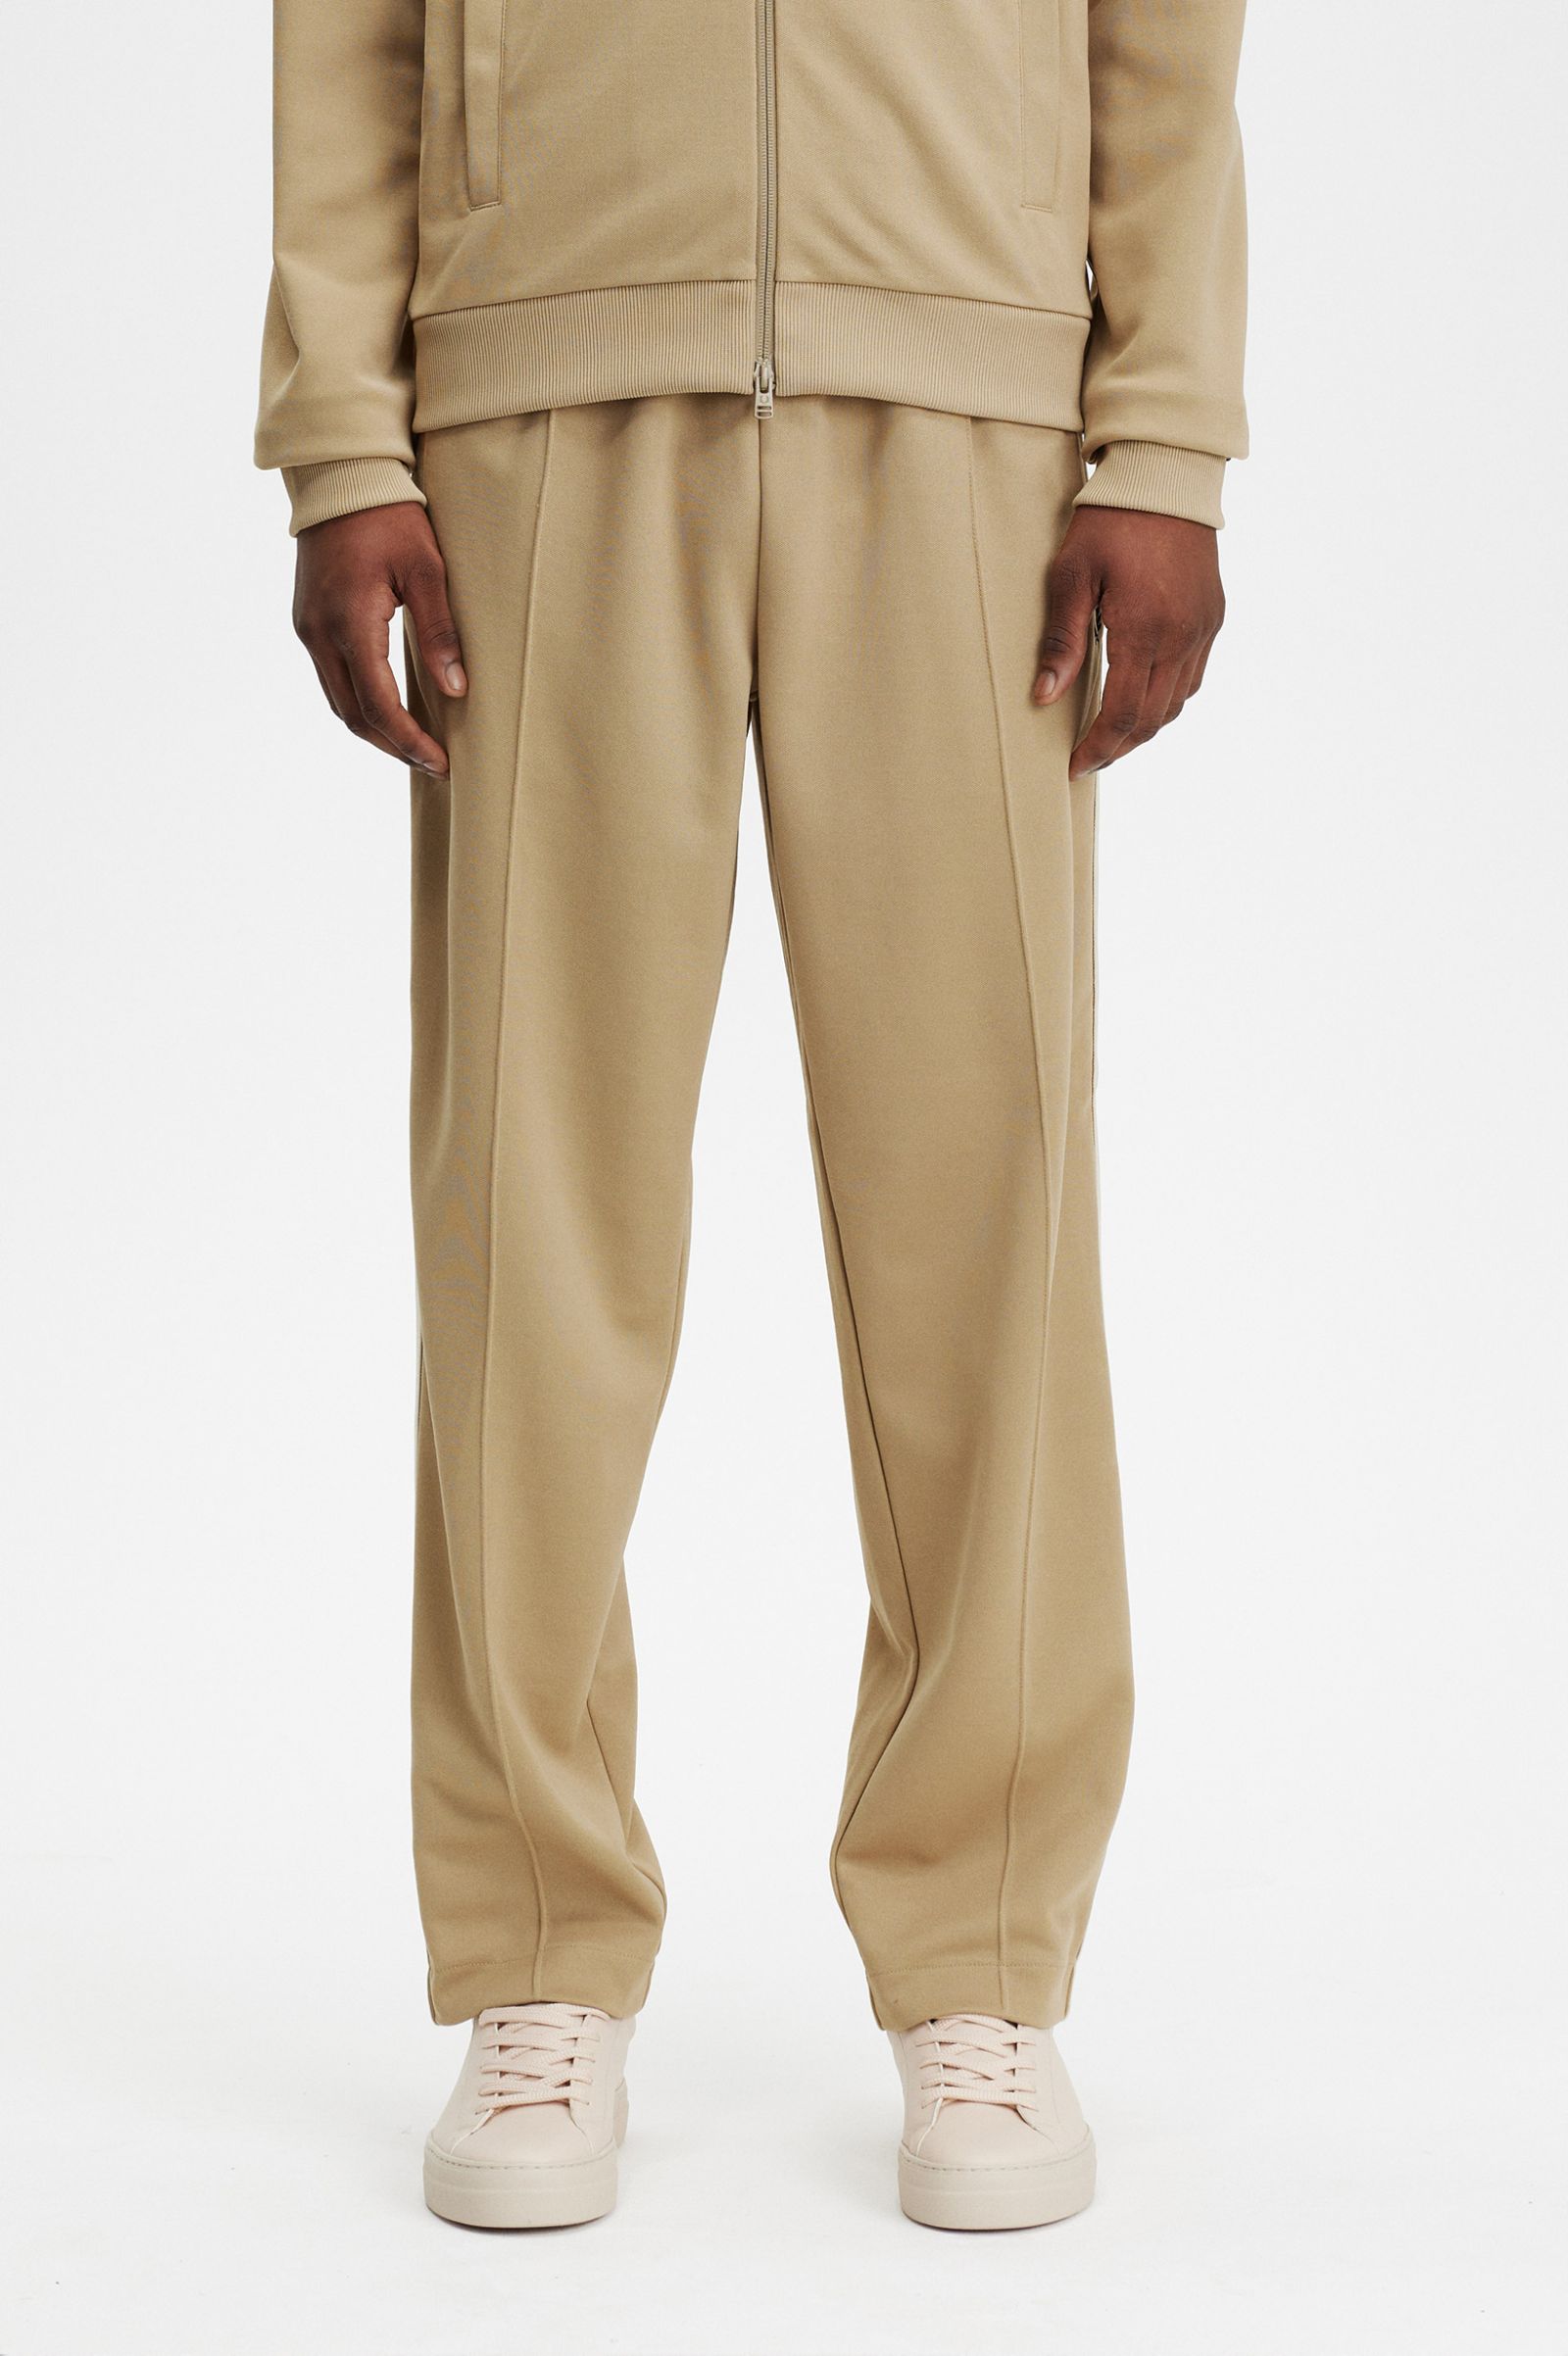 Fred Perry Tape Detail Track Pants in Warm Stone